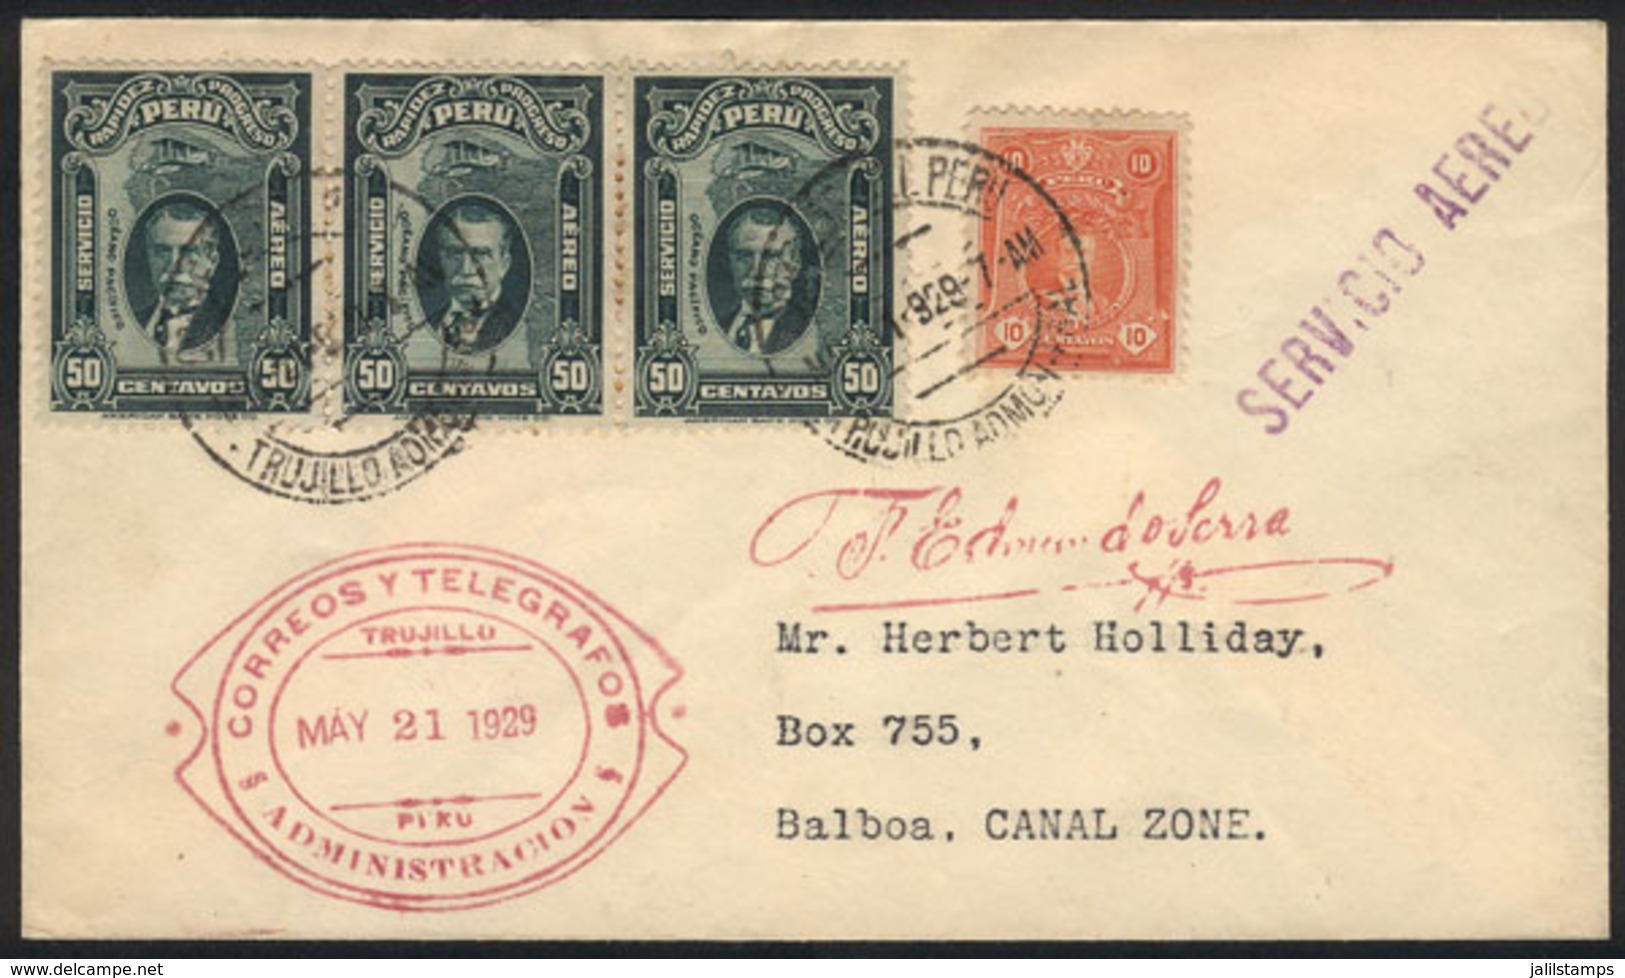 PERU: 21/MAY/1929 Trujillo - Cristobal, First Flight, Arrival Backstamp, Cover Of Excellent Quality! - Peru